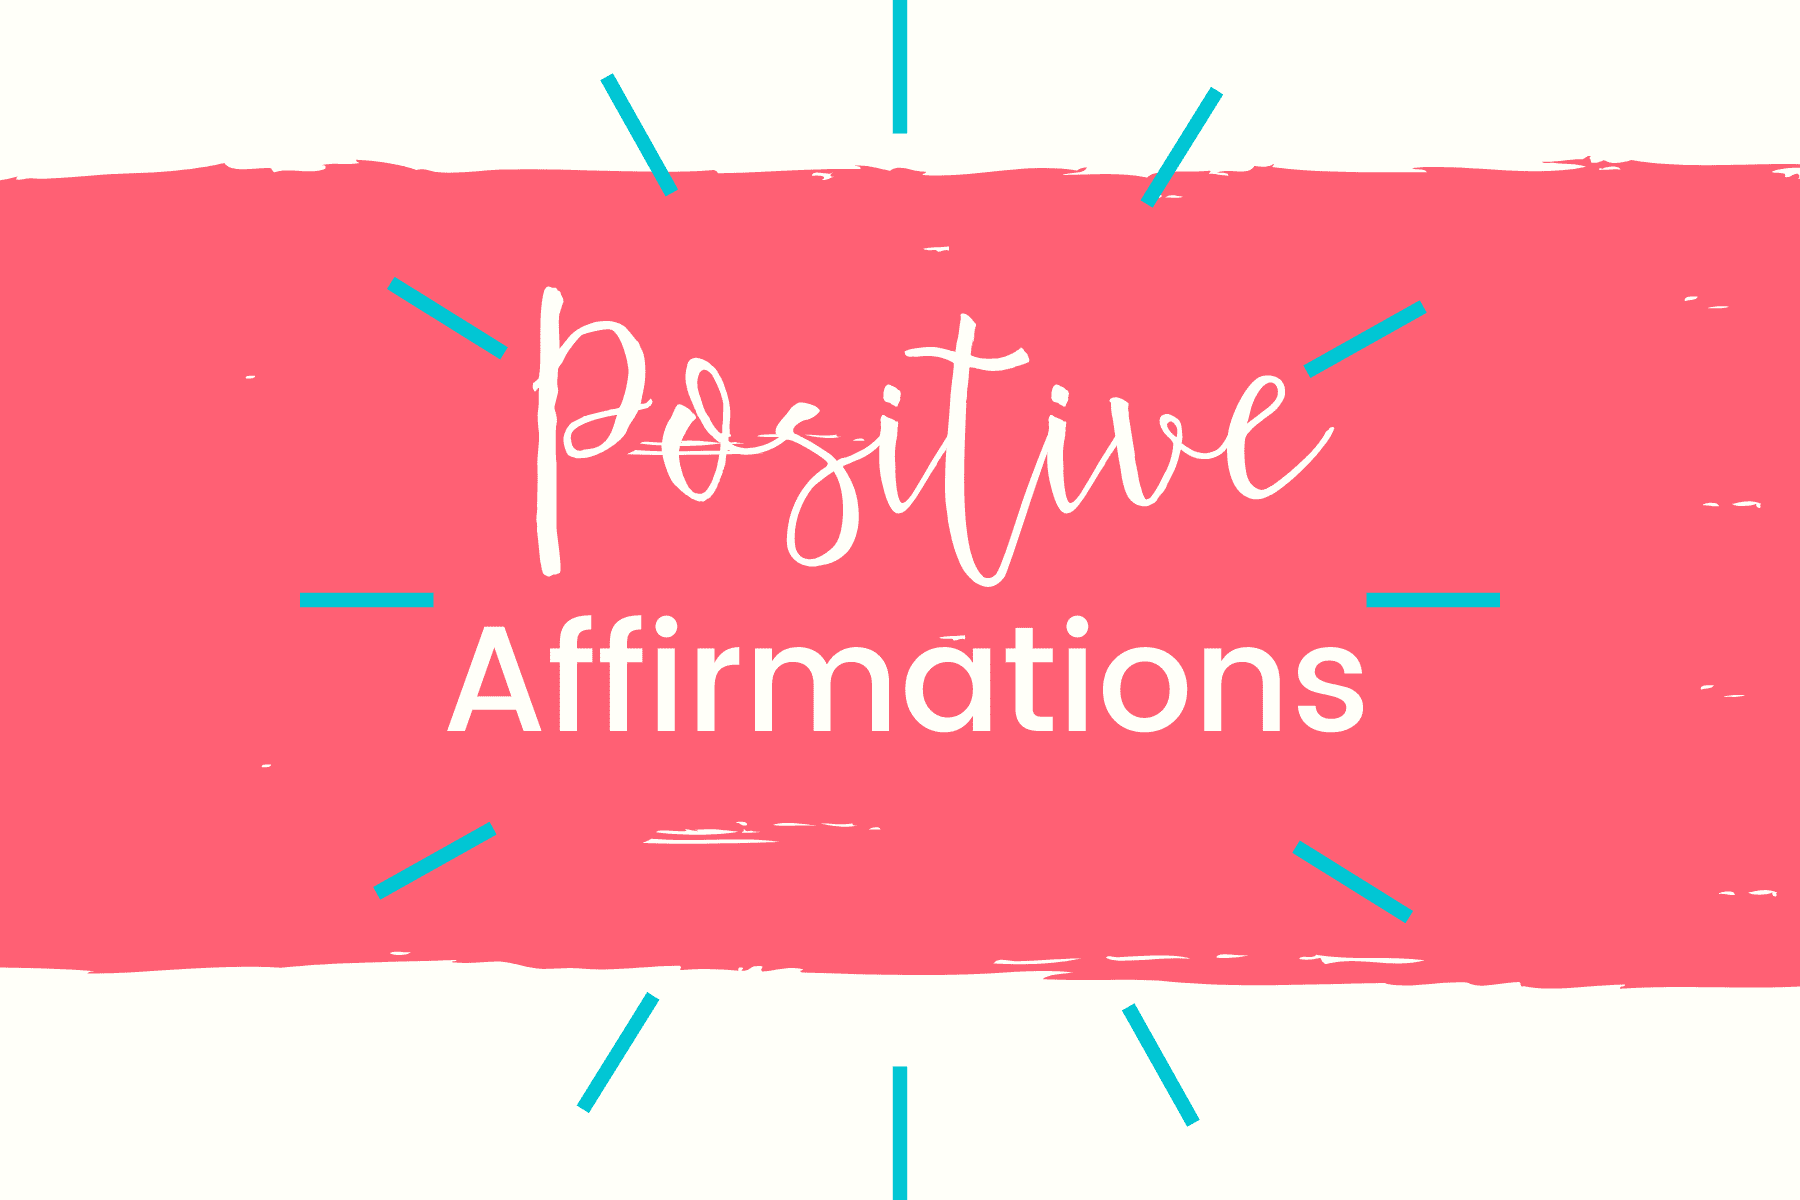 Have you heard of using positive affirmations to lift your mood and improve your day? Positive affirmations if used can change your mood and outlook on life!